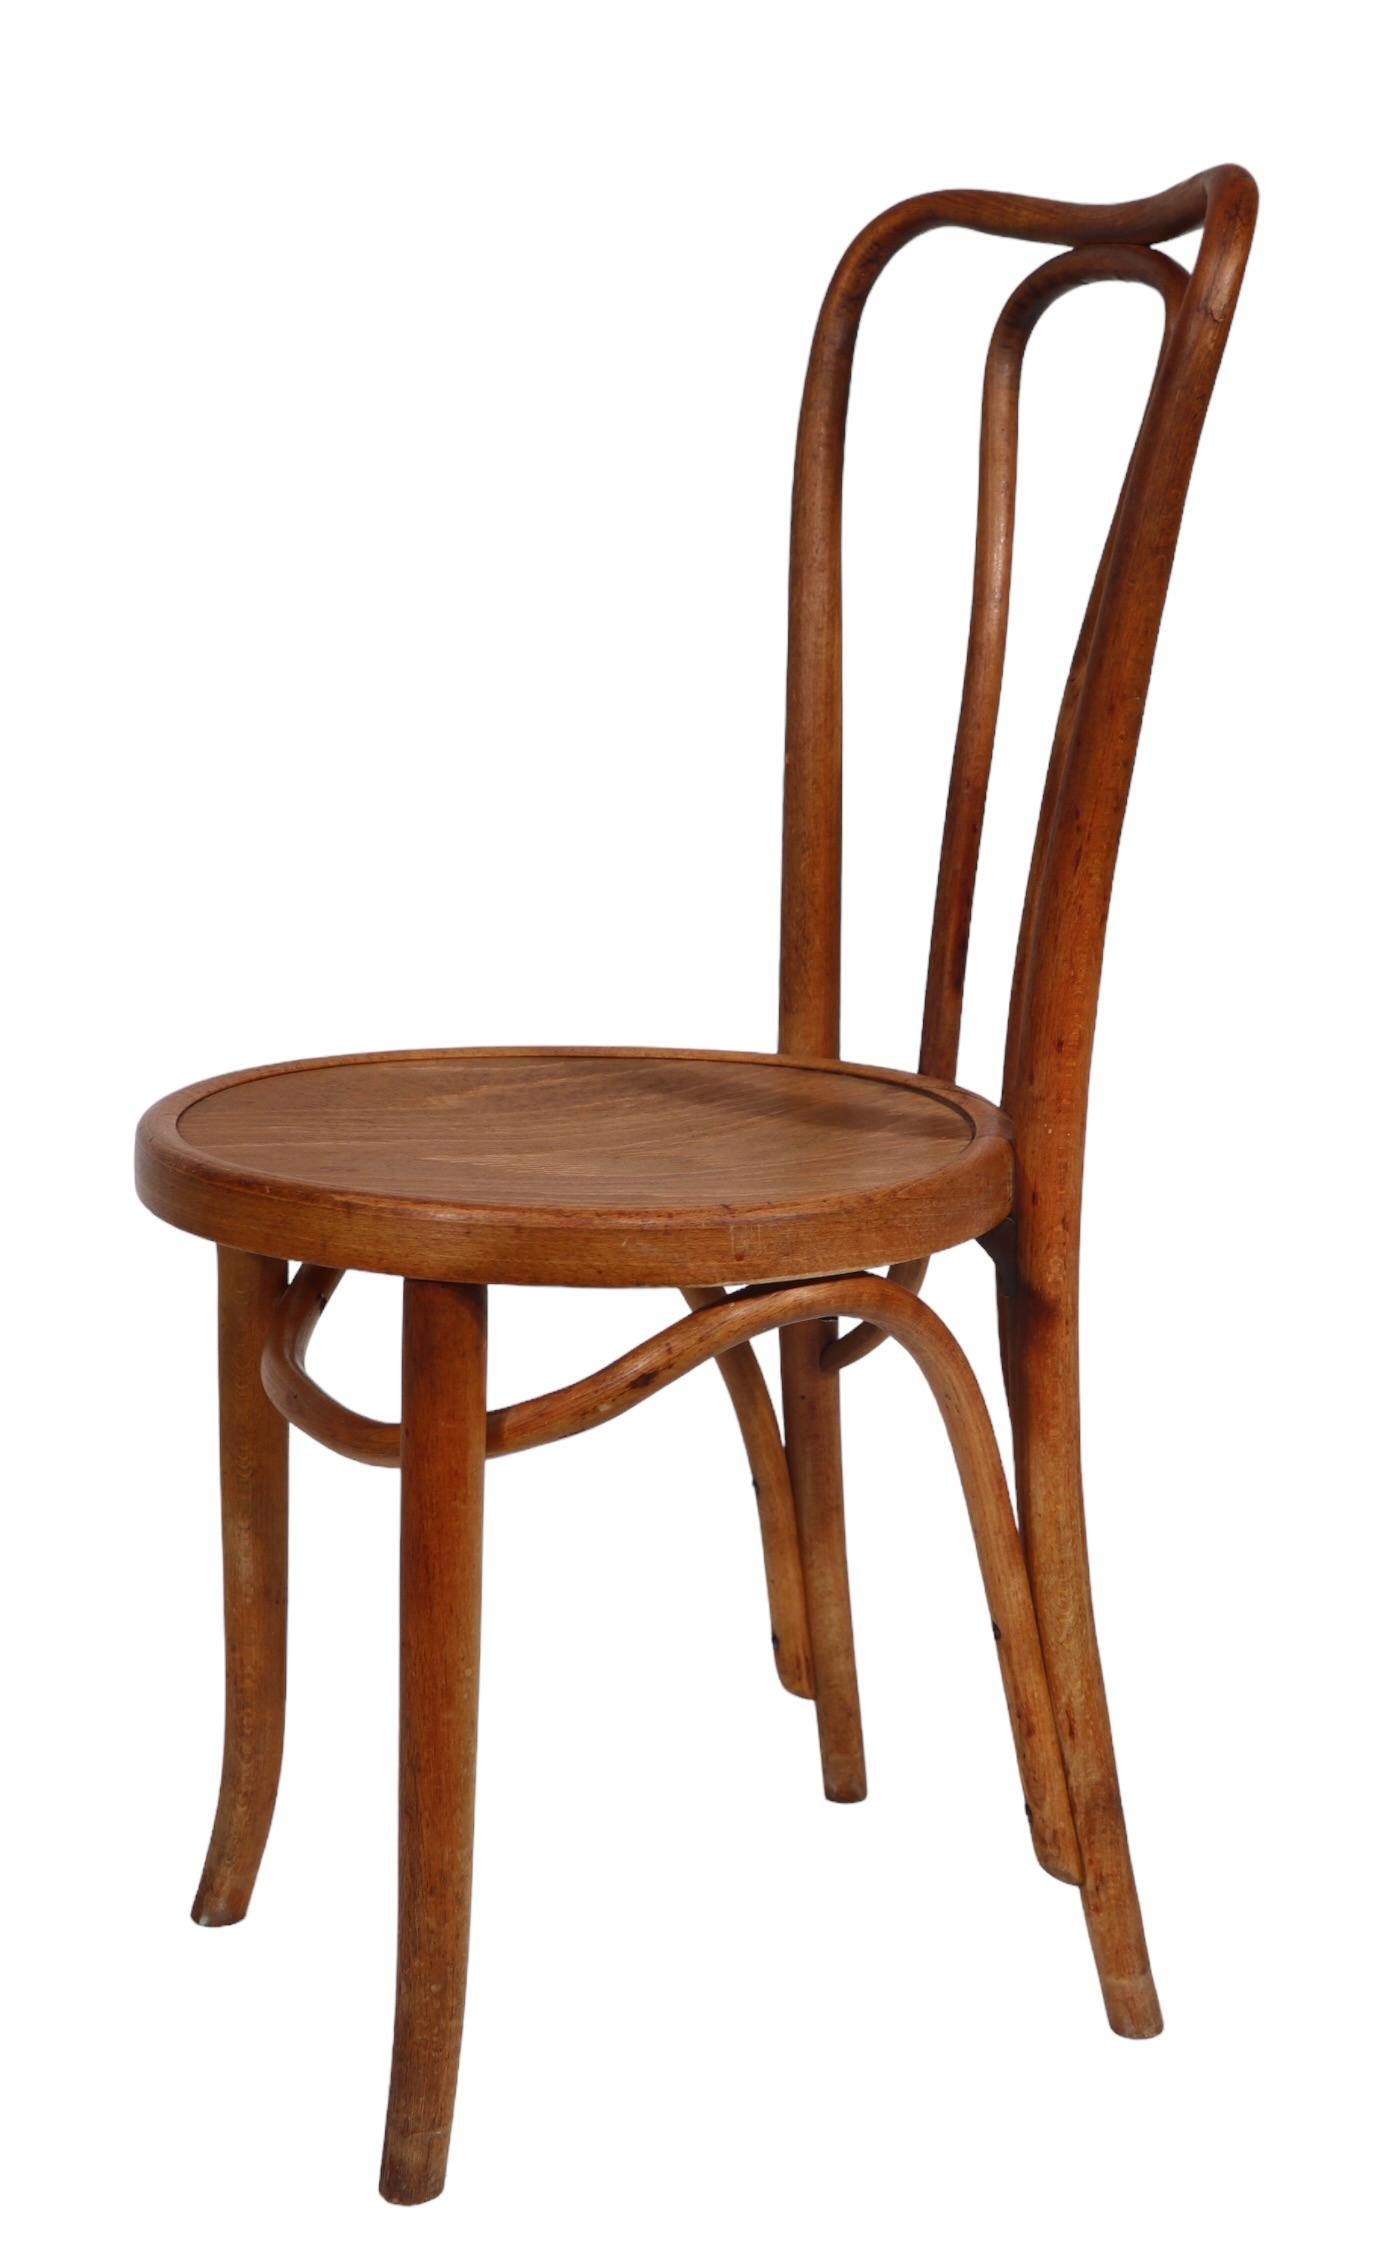 Vienna Secessionist Bentwood Chairs att. to Thonet  Made in Poland 3 available  9